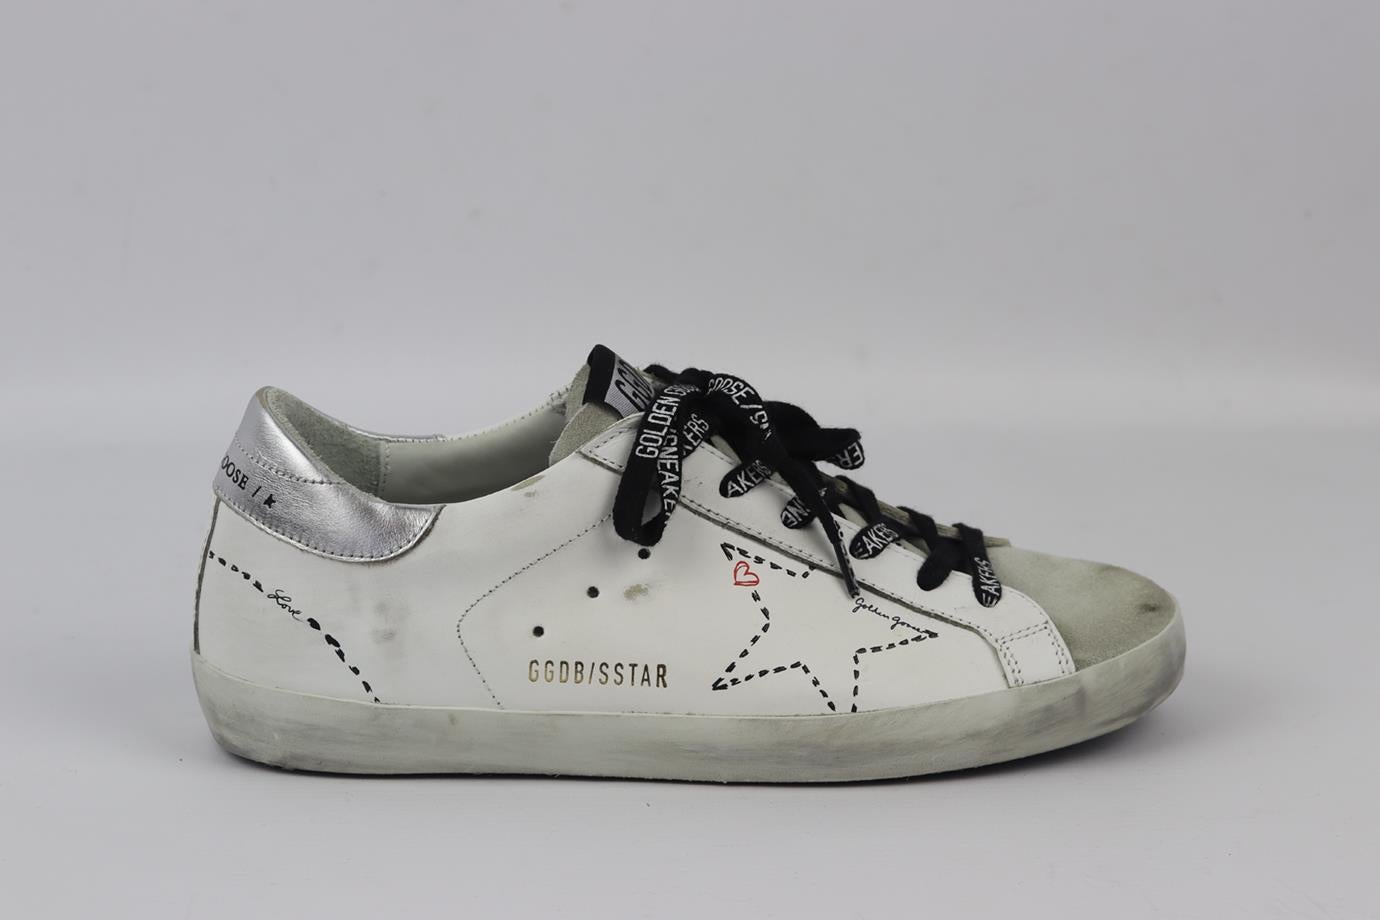 Golden Goose Deluxe Brand Superstar leather and suede sneakers. White, black, ecru and red. Lace up fastening at front. Does not come with dustbag or box. Size: EU 38 (UK 5, US 8). Insole: 9.9 in. Heel Height: 1.4 in. New without box